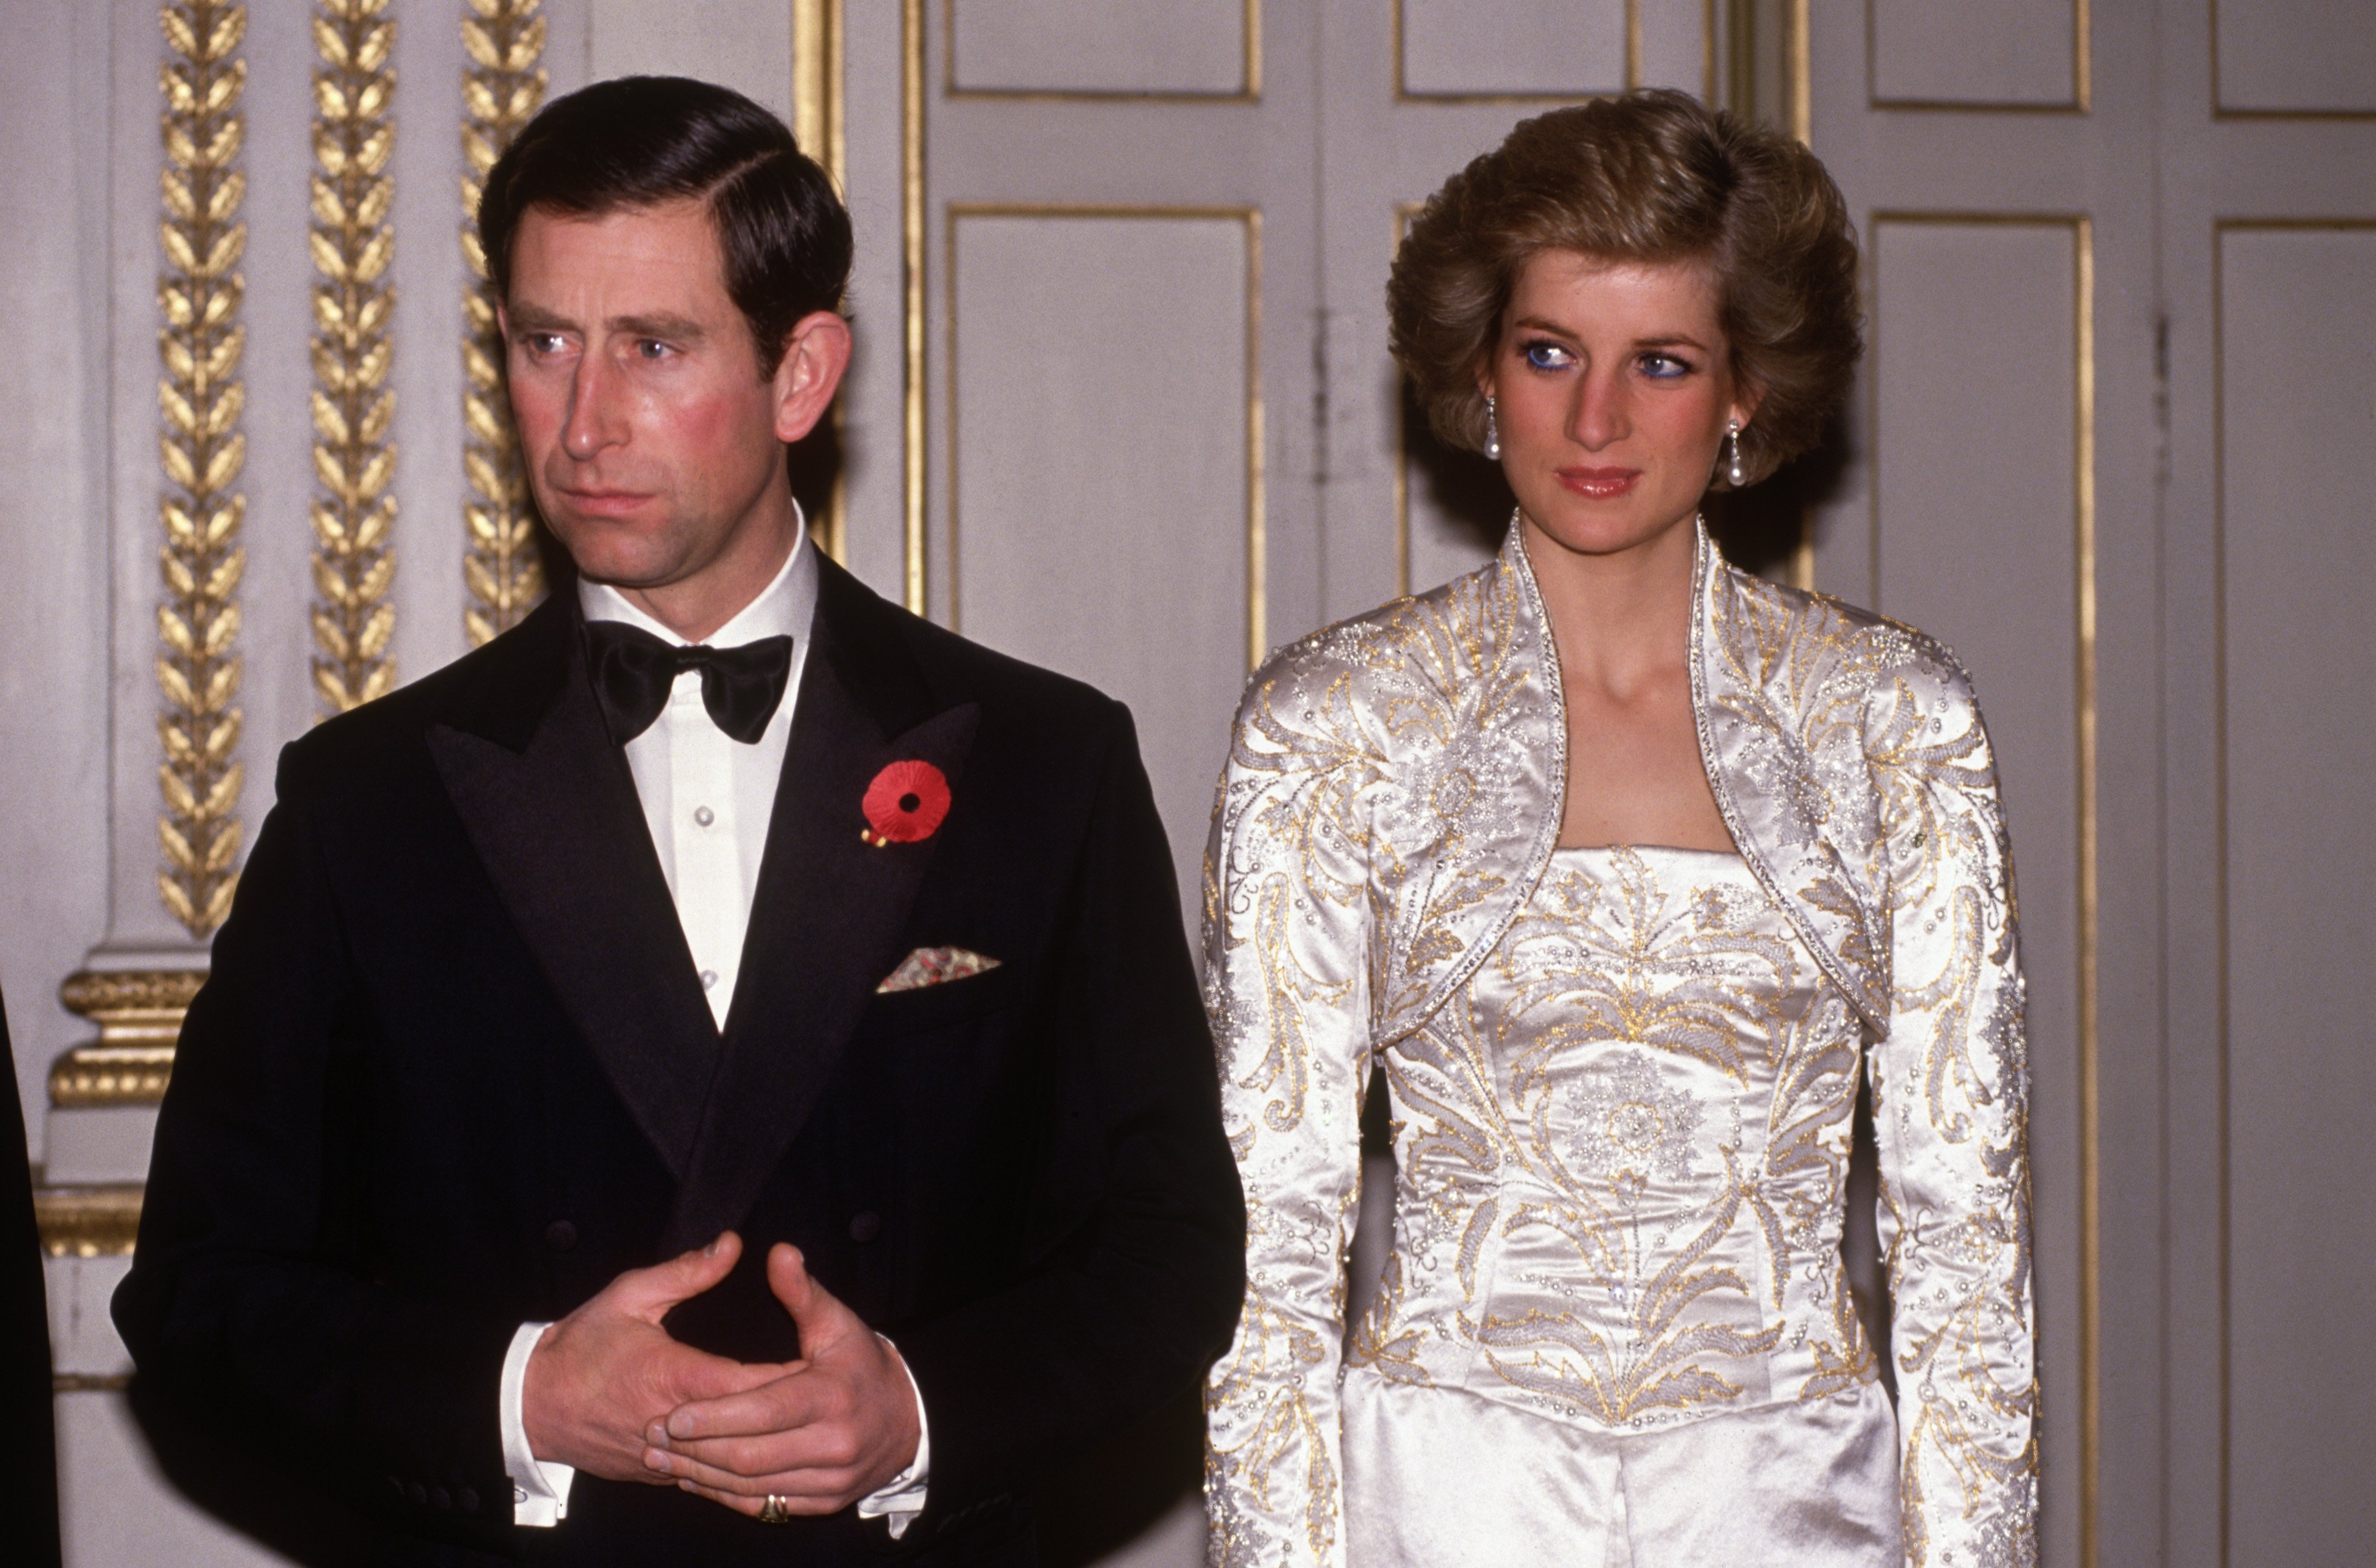 Princess Diana and King Charles III in Paris 1988. | Source: Getty Images